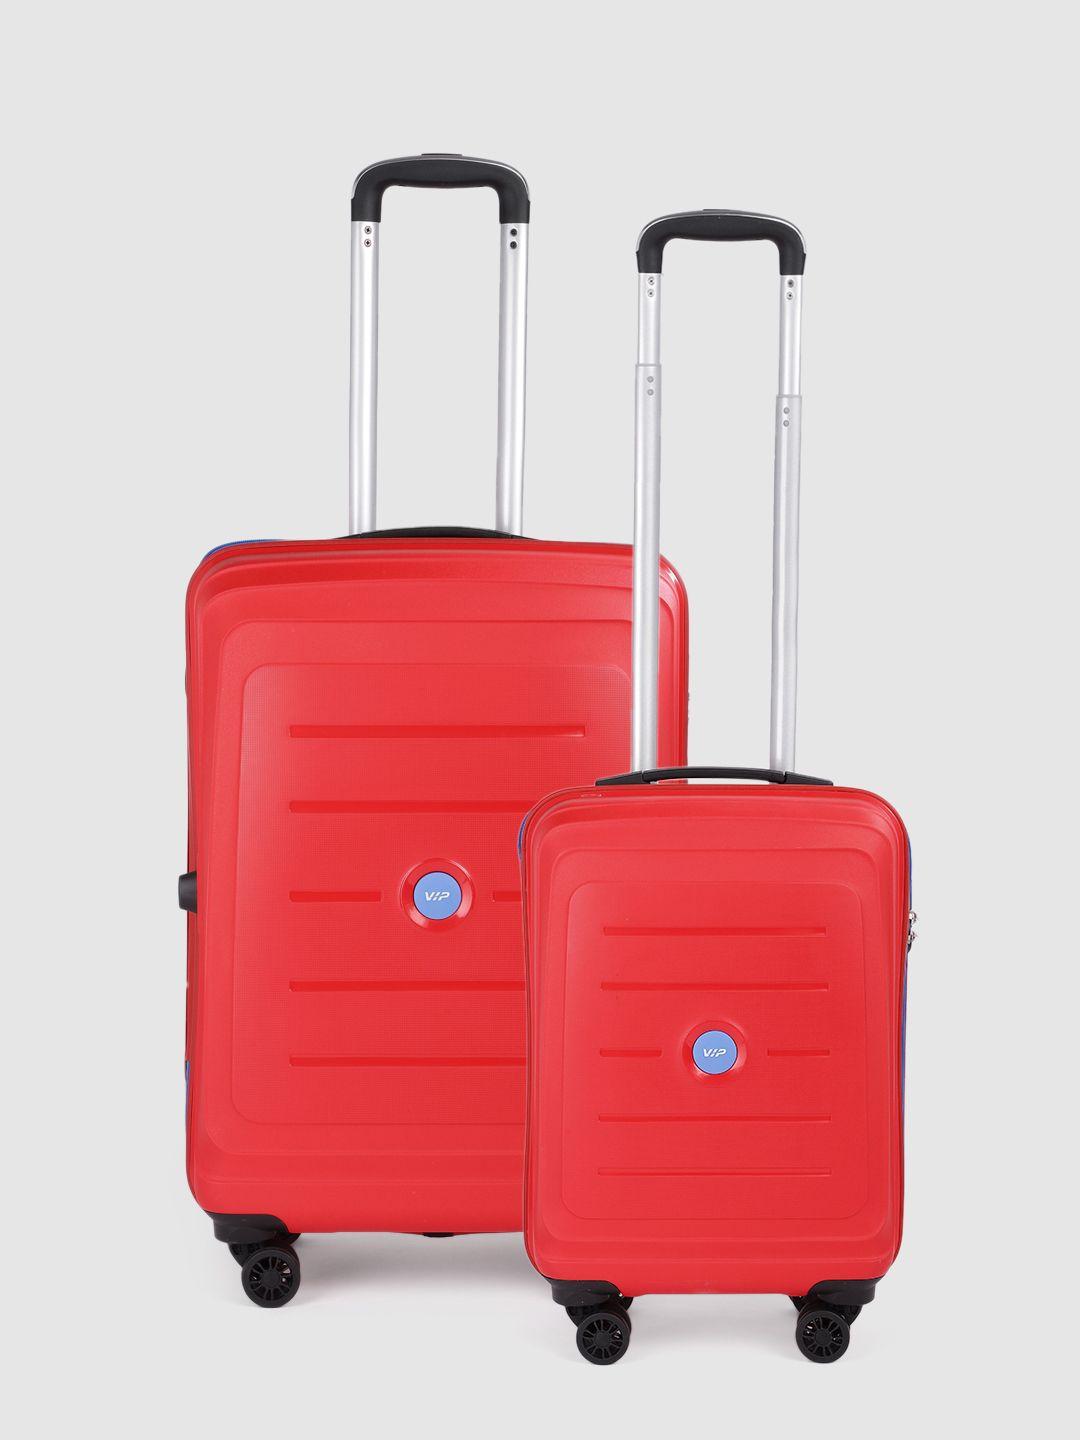 vip corsa set of 2 hard-sided textured trolley suitcases - cabin and medium